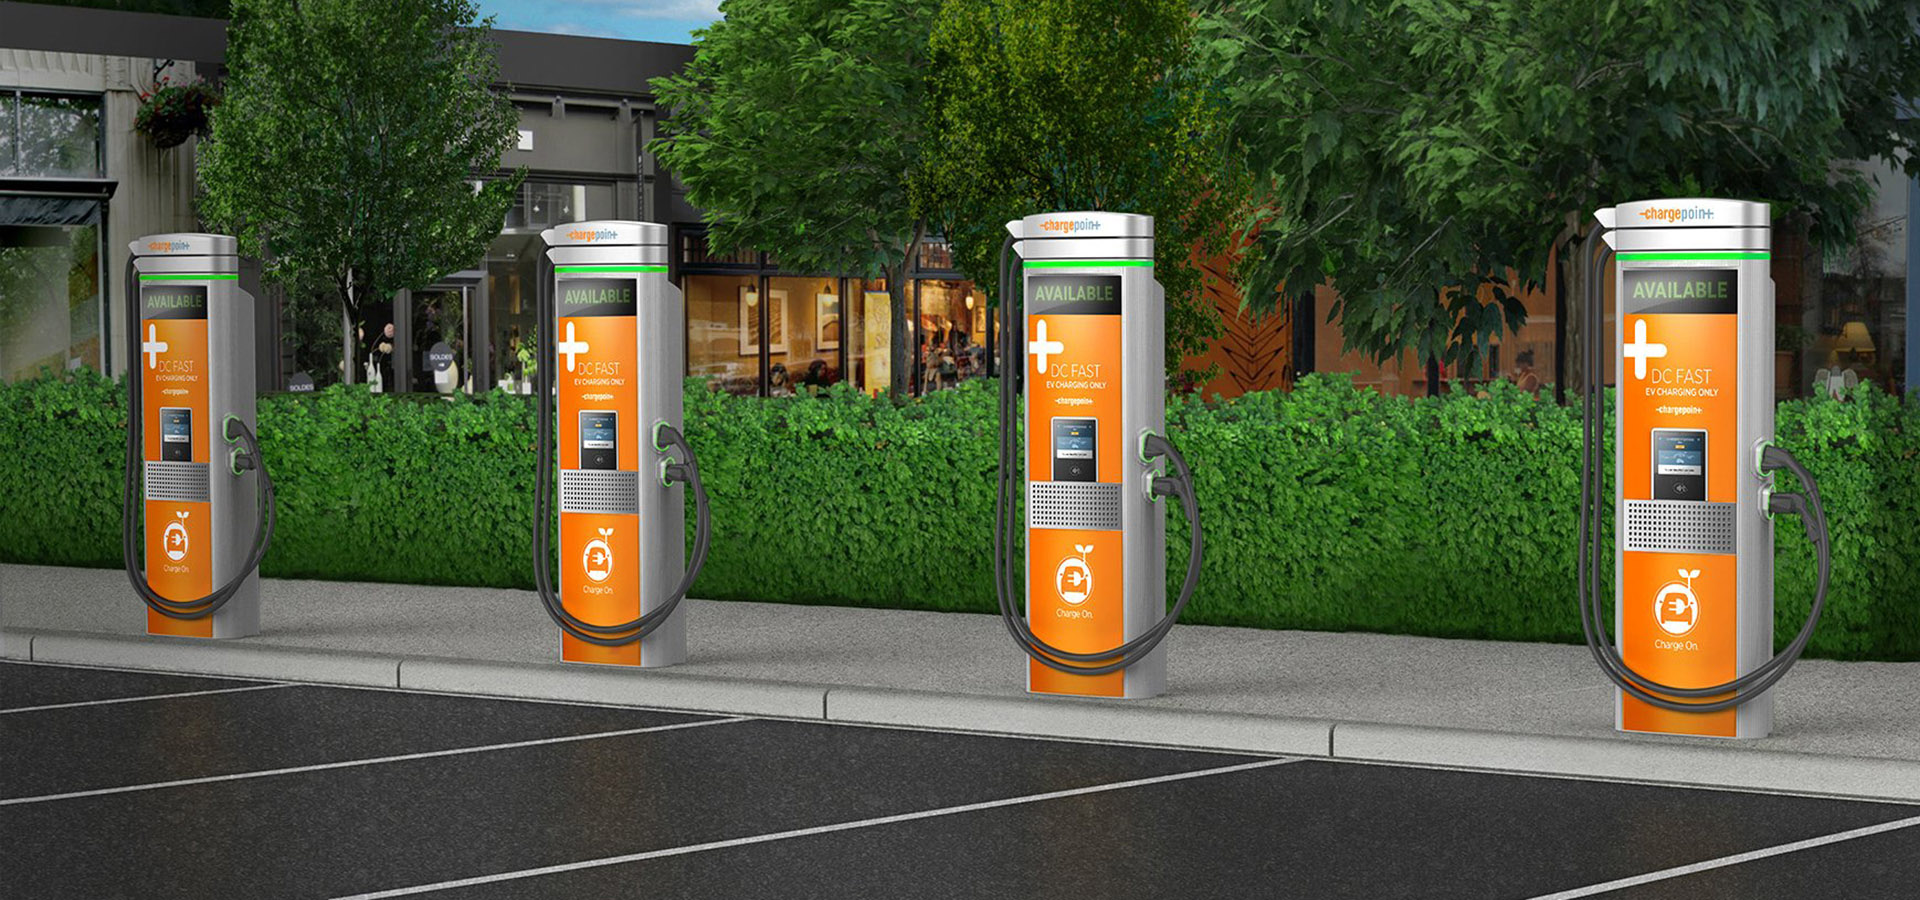 parking lot with 4 chargepoint charging station stands